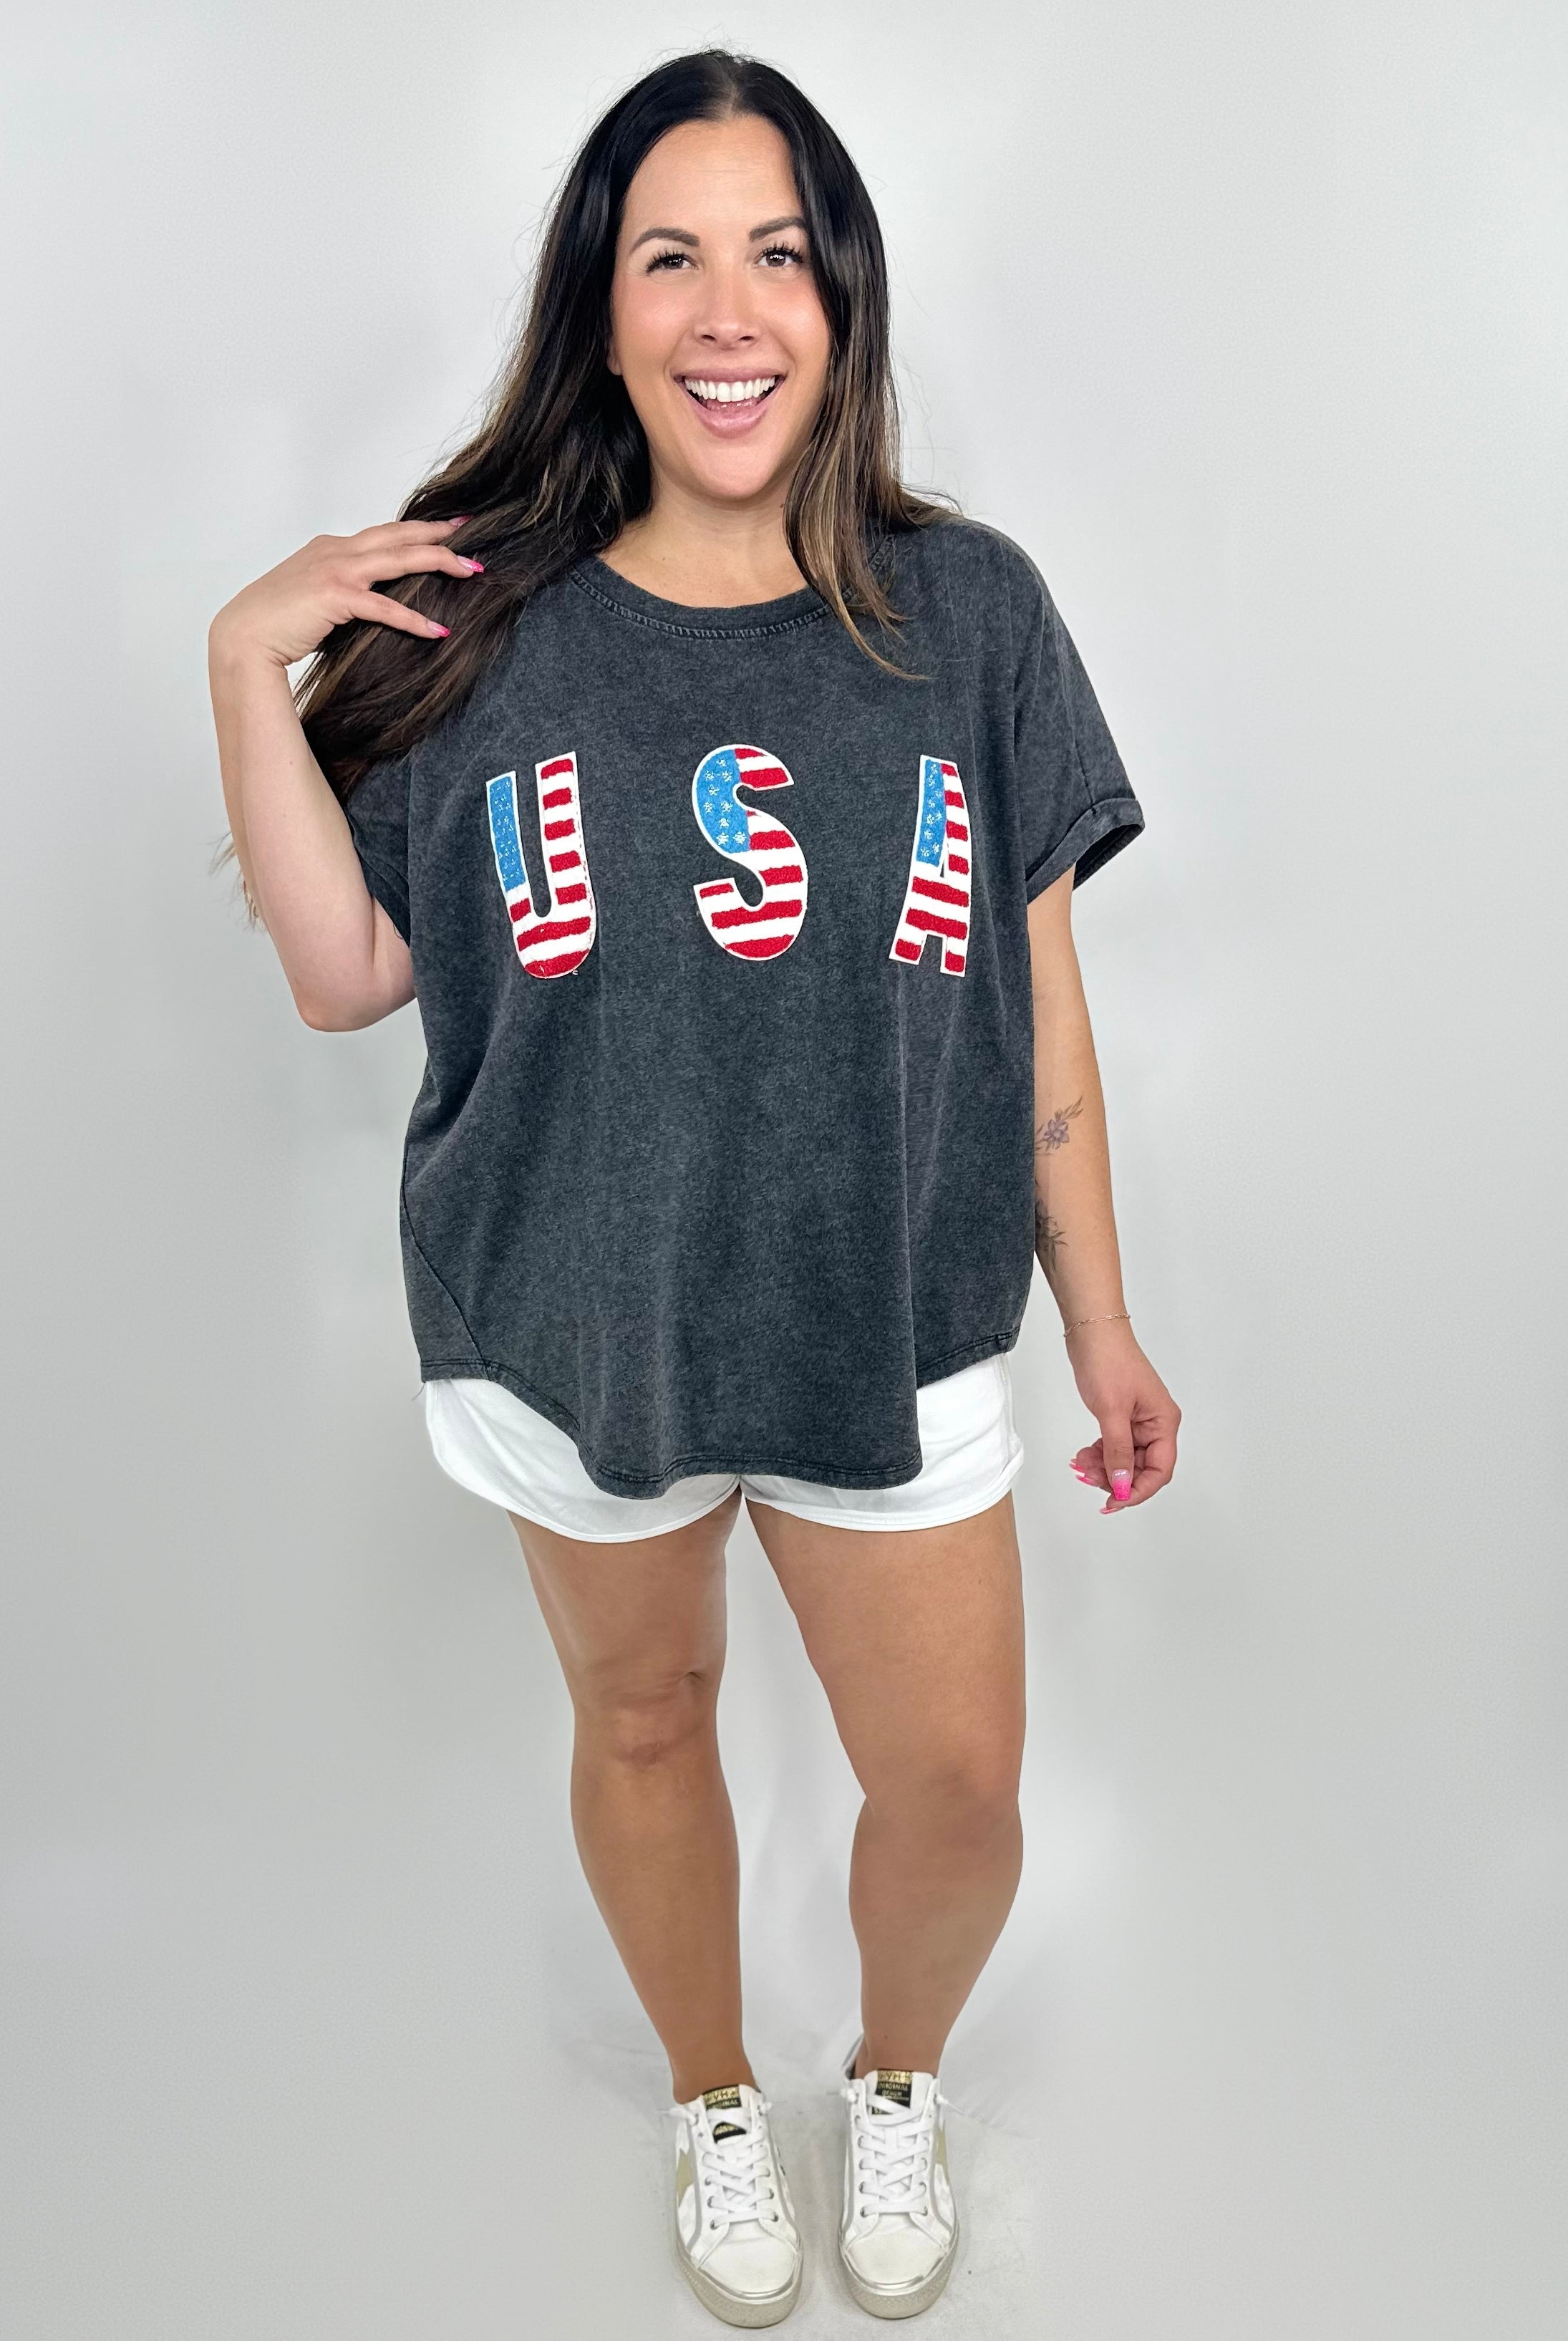 US of A Graphic Tee-130 Graphic Tees-Bibi-Heathered Boho Boutique, Women's Fashion and Accessories in Palmetto, FL